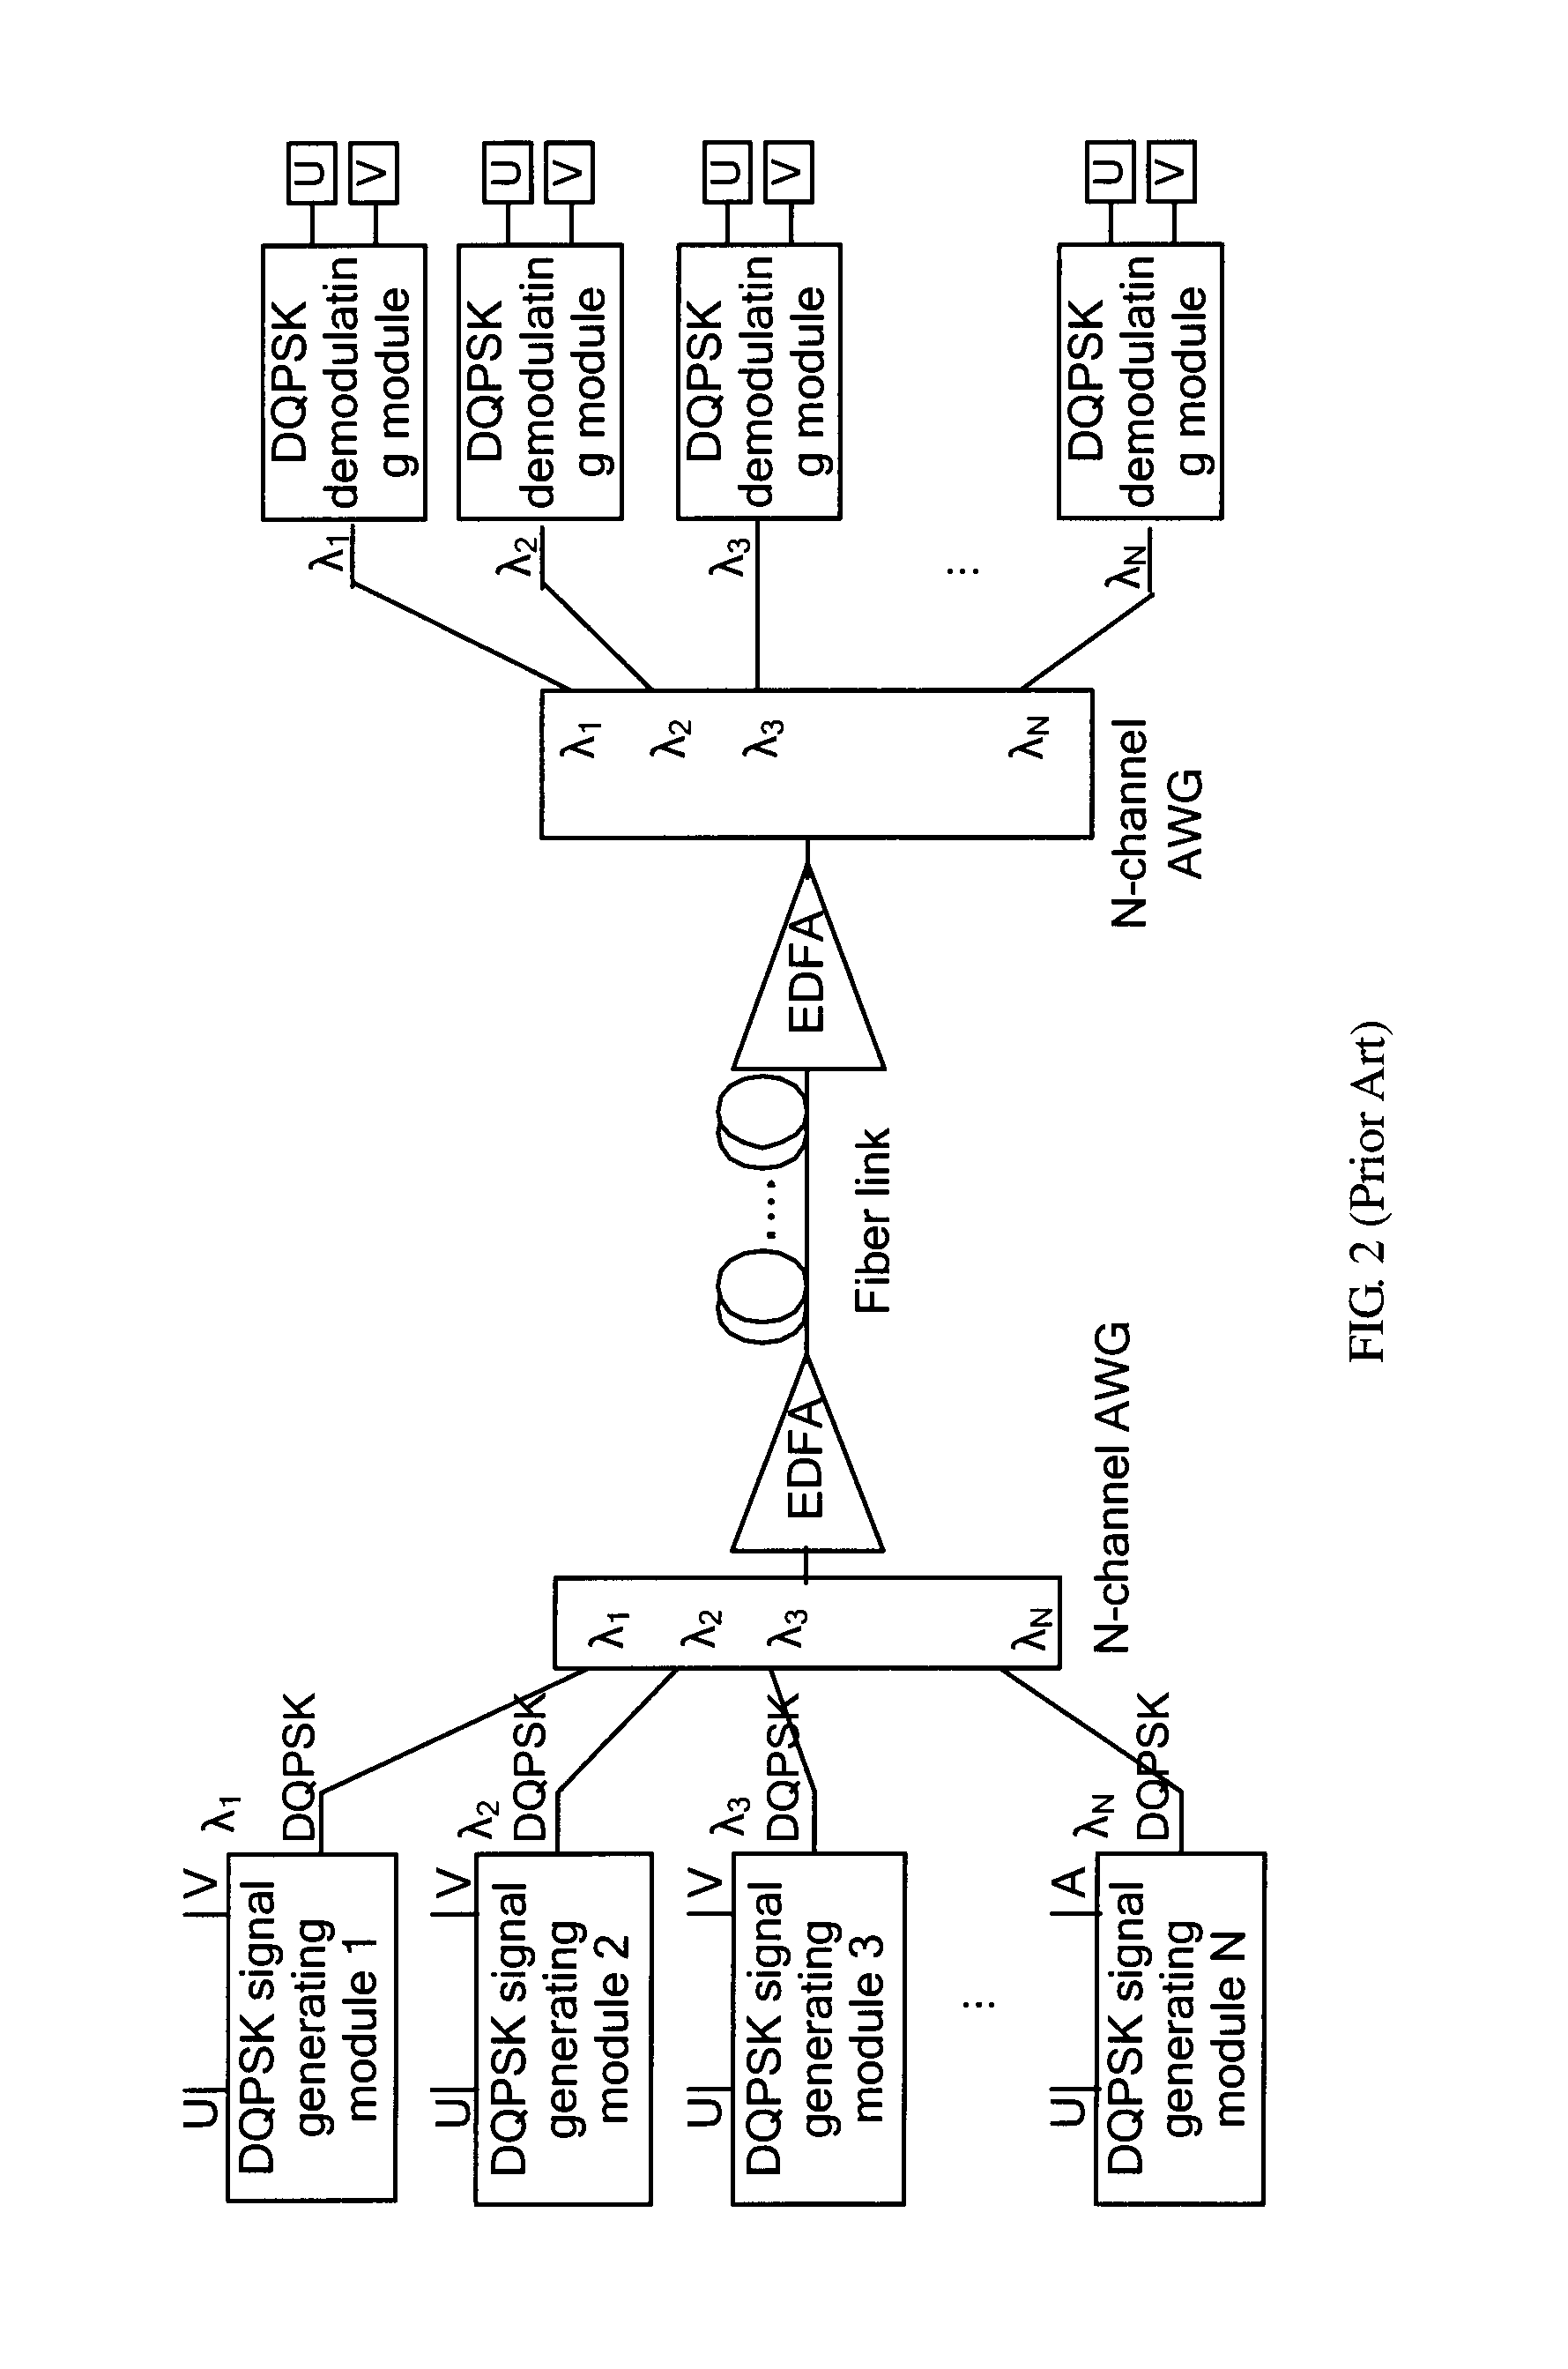 Differential quadrature phase shift keying system, method, and device